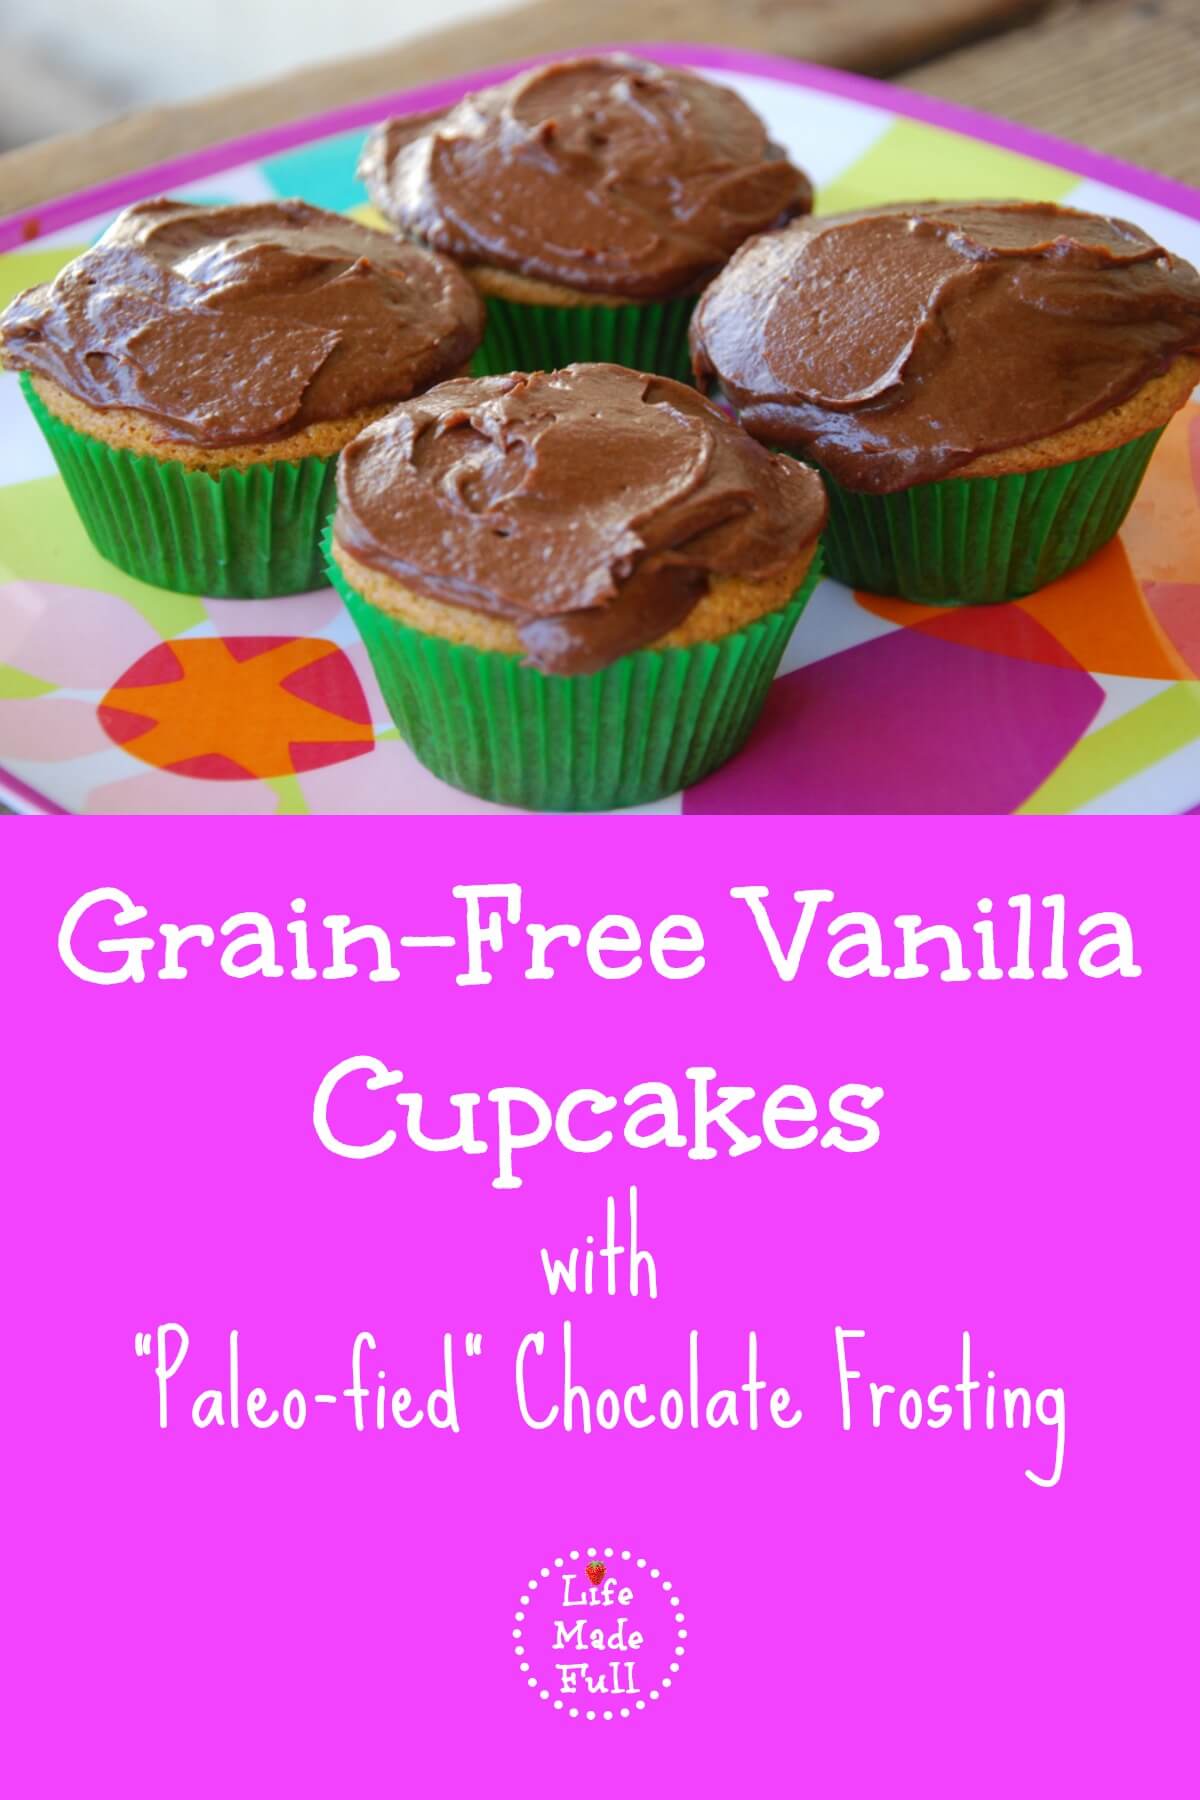 Grain-Free Vanilla Cupcakes with “Paleo-fied” Chocolate Frosting